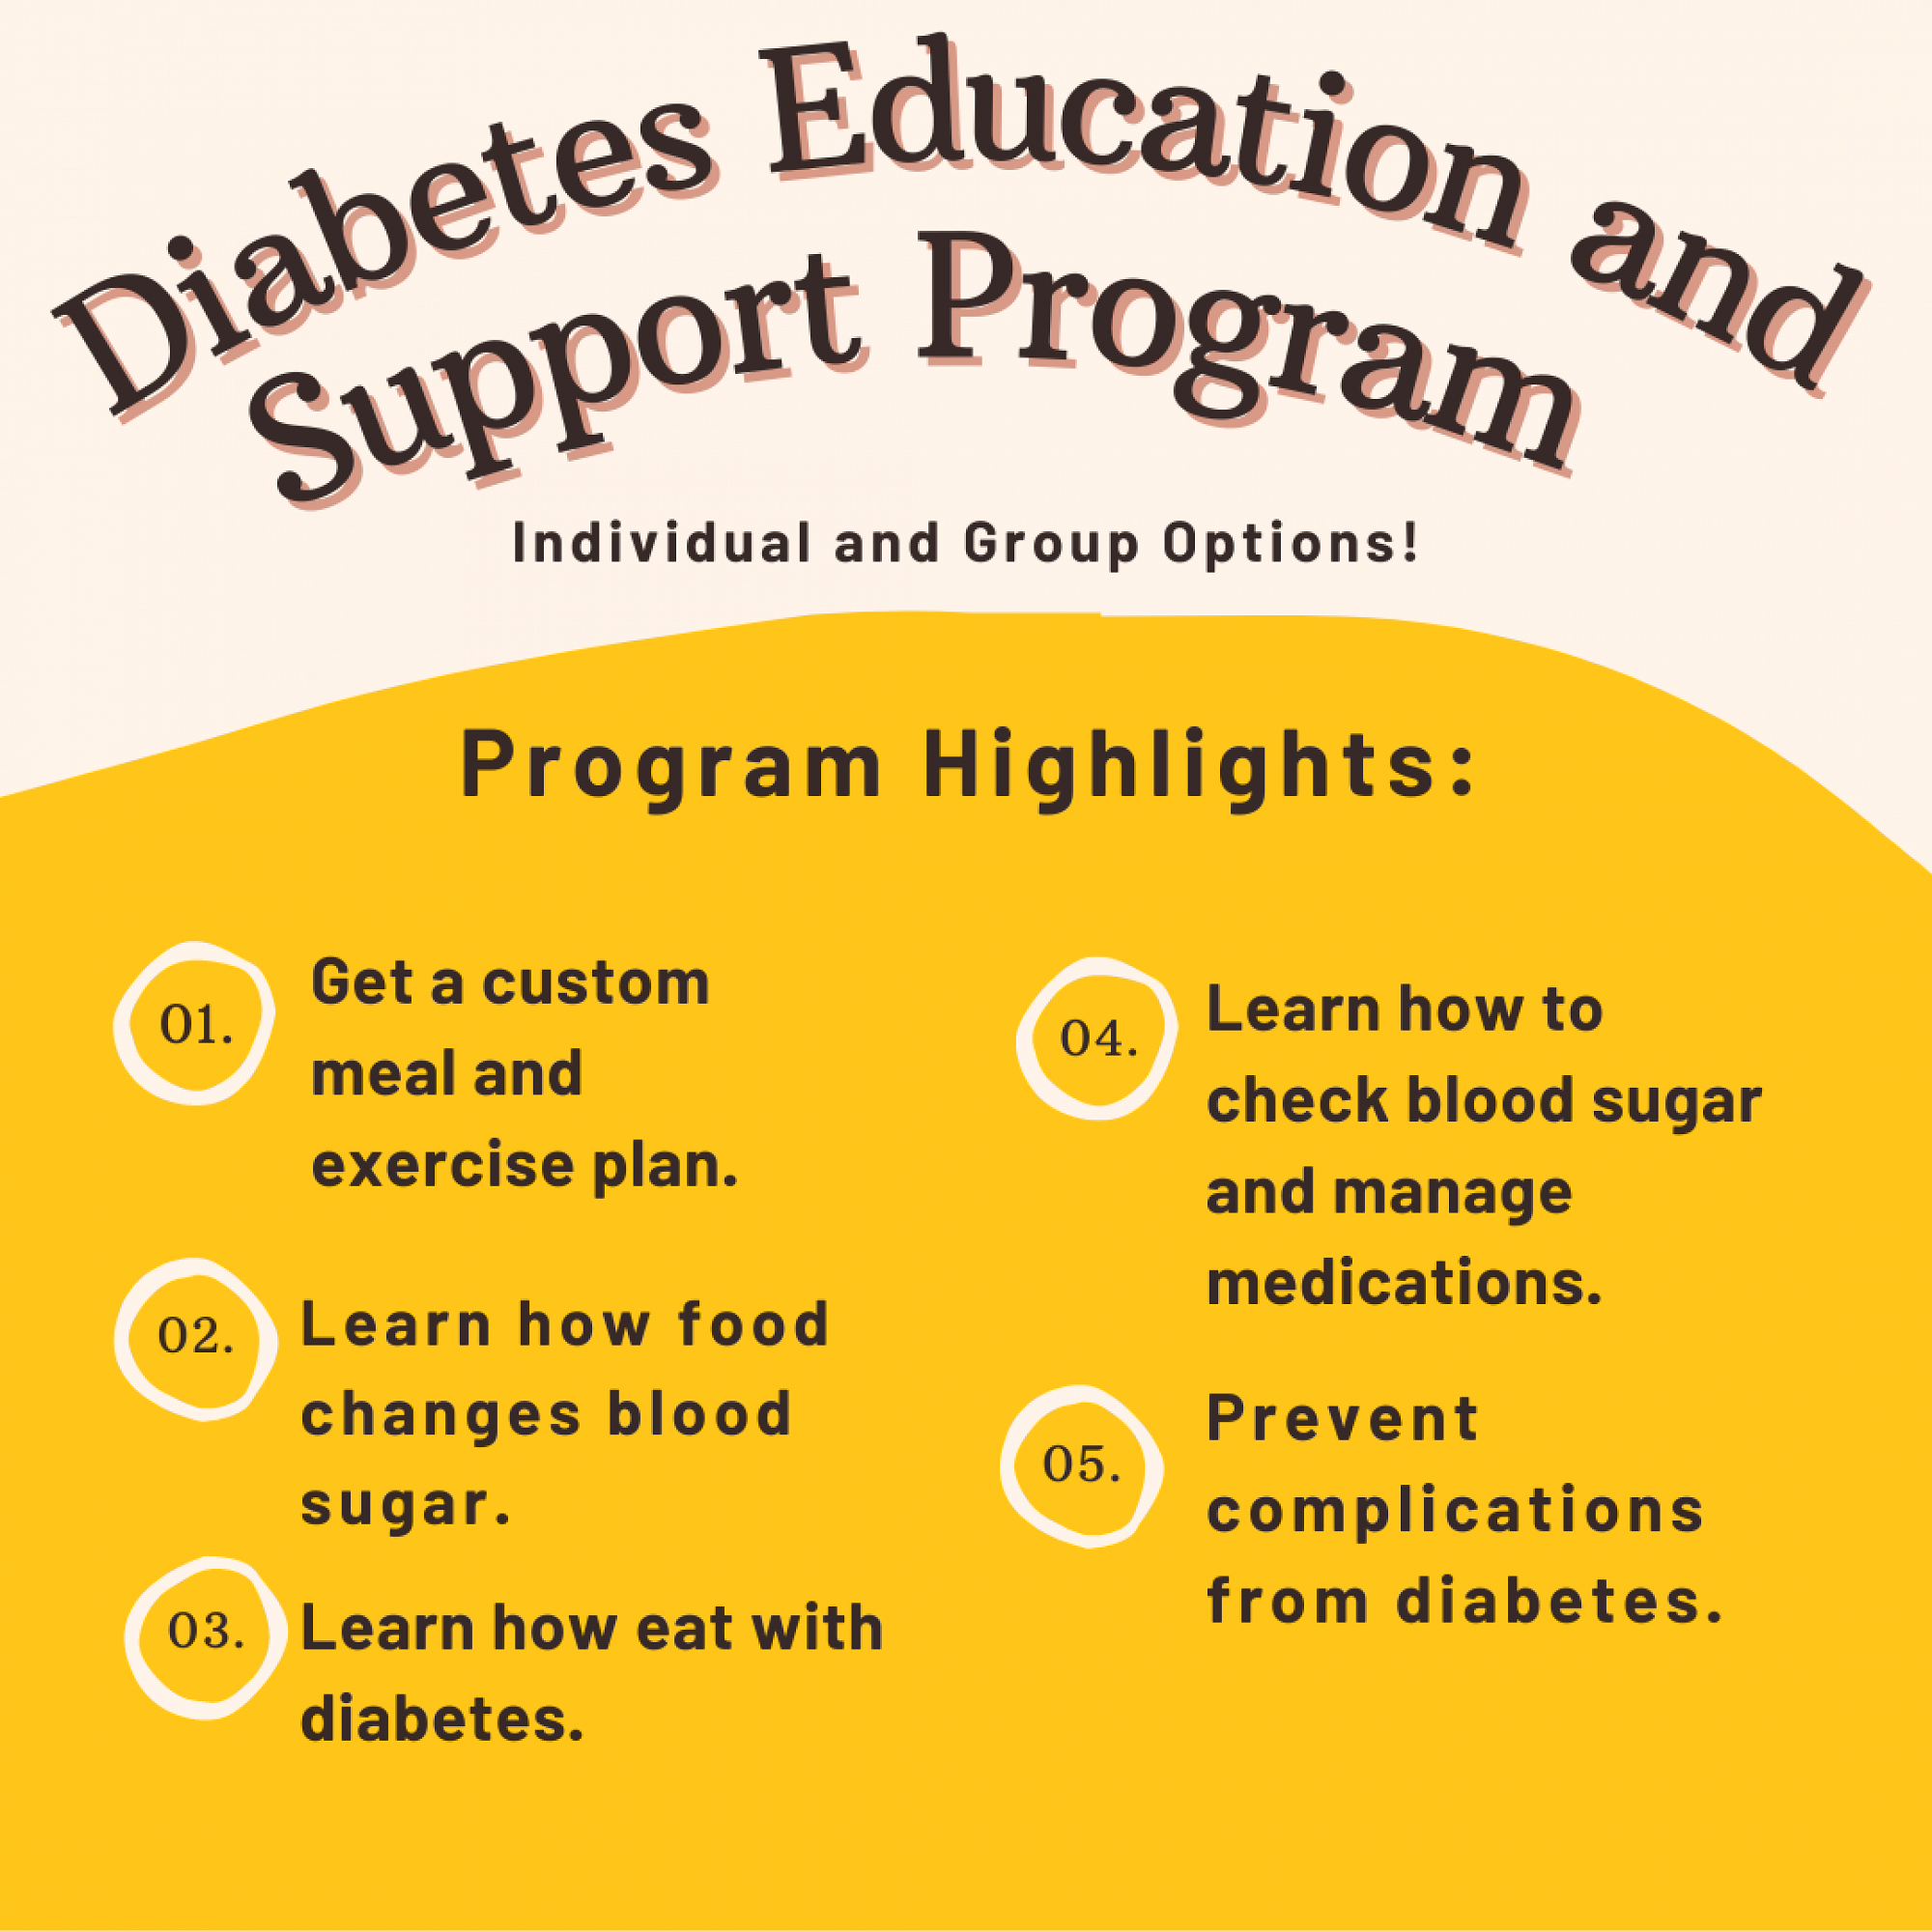 Diabetes Education and Support Program